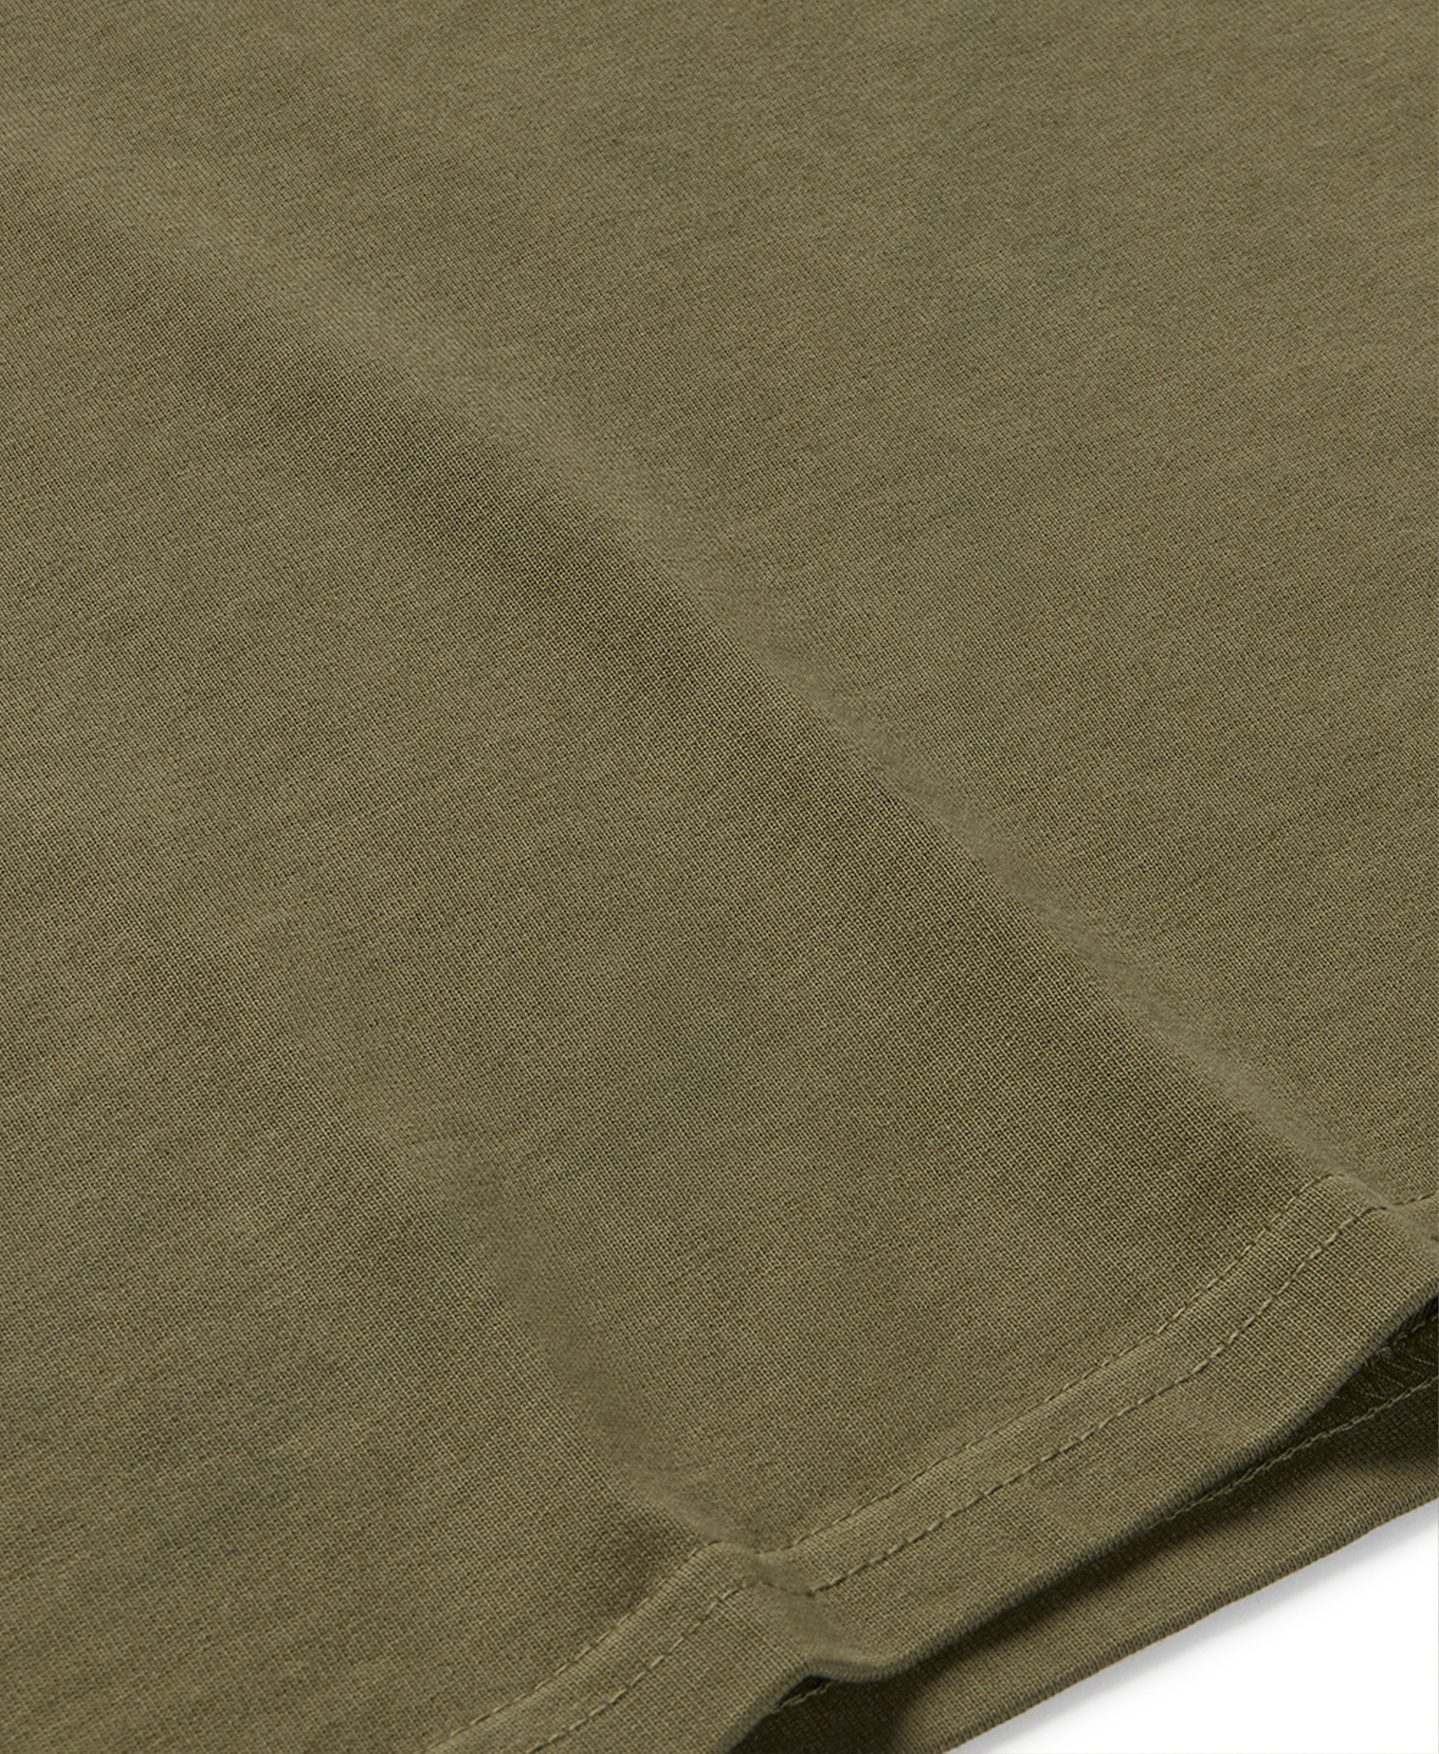 300 GSM 'Army Olive' T-Shirt